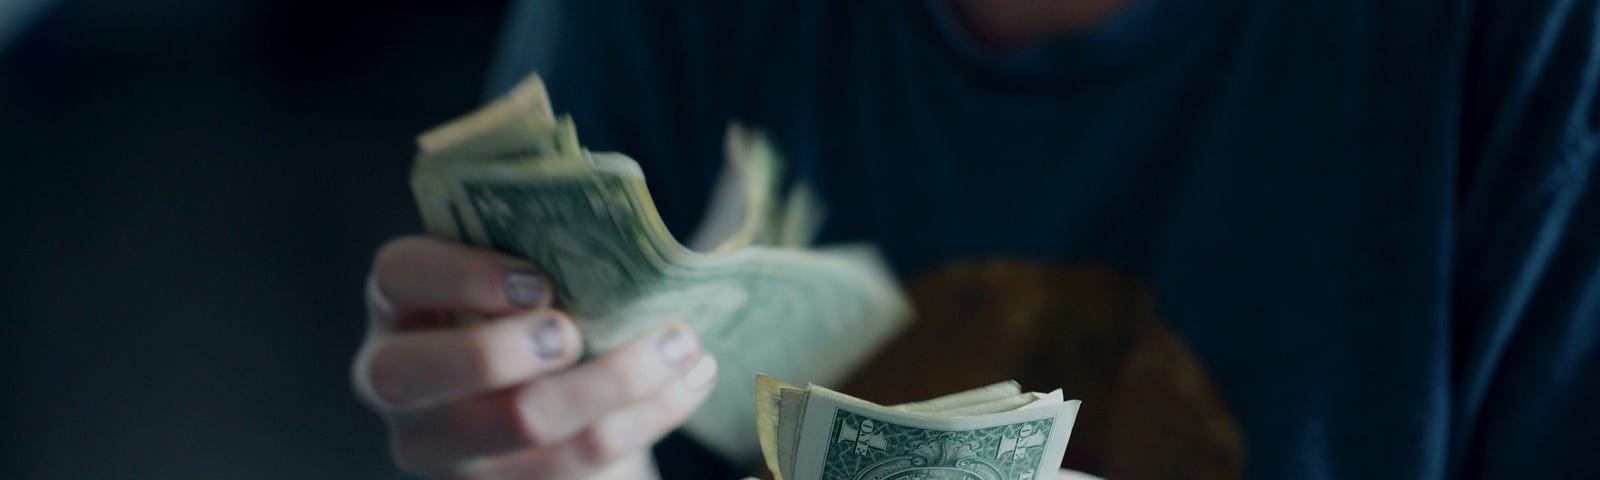 A woman counting money.